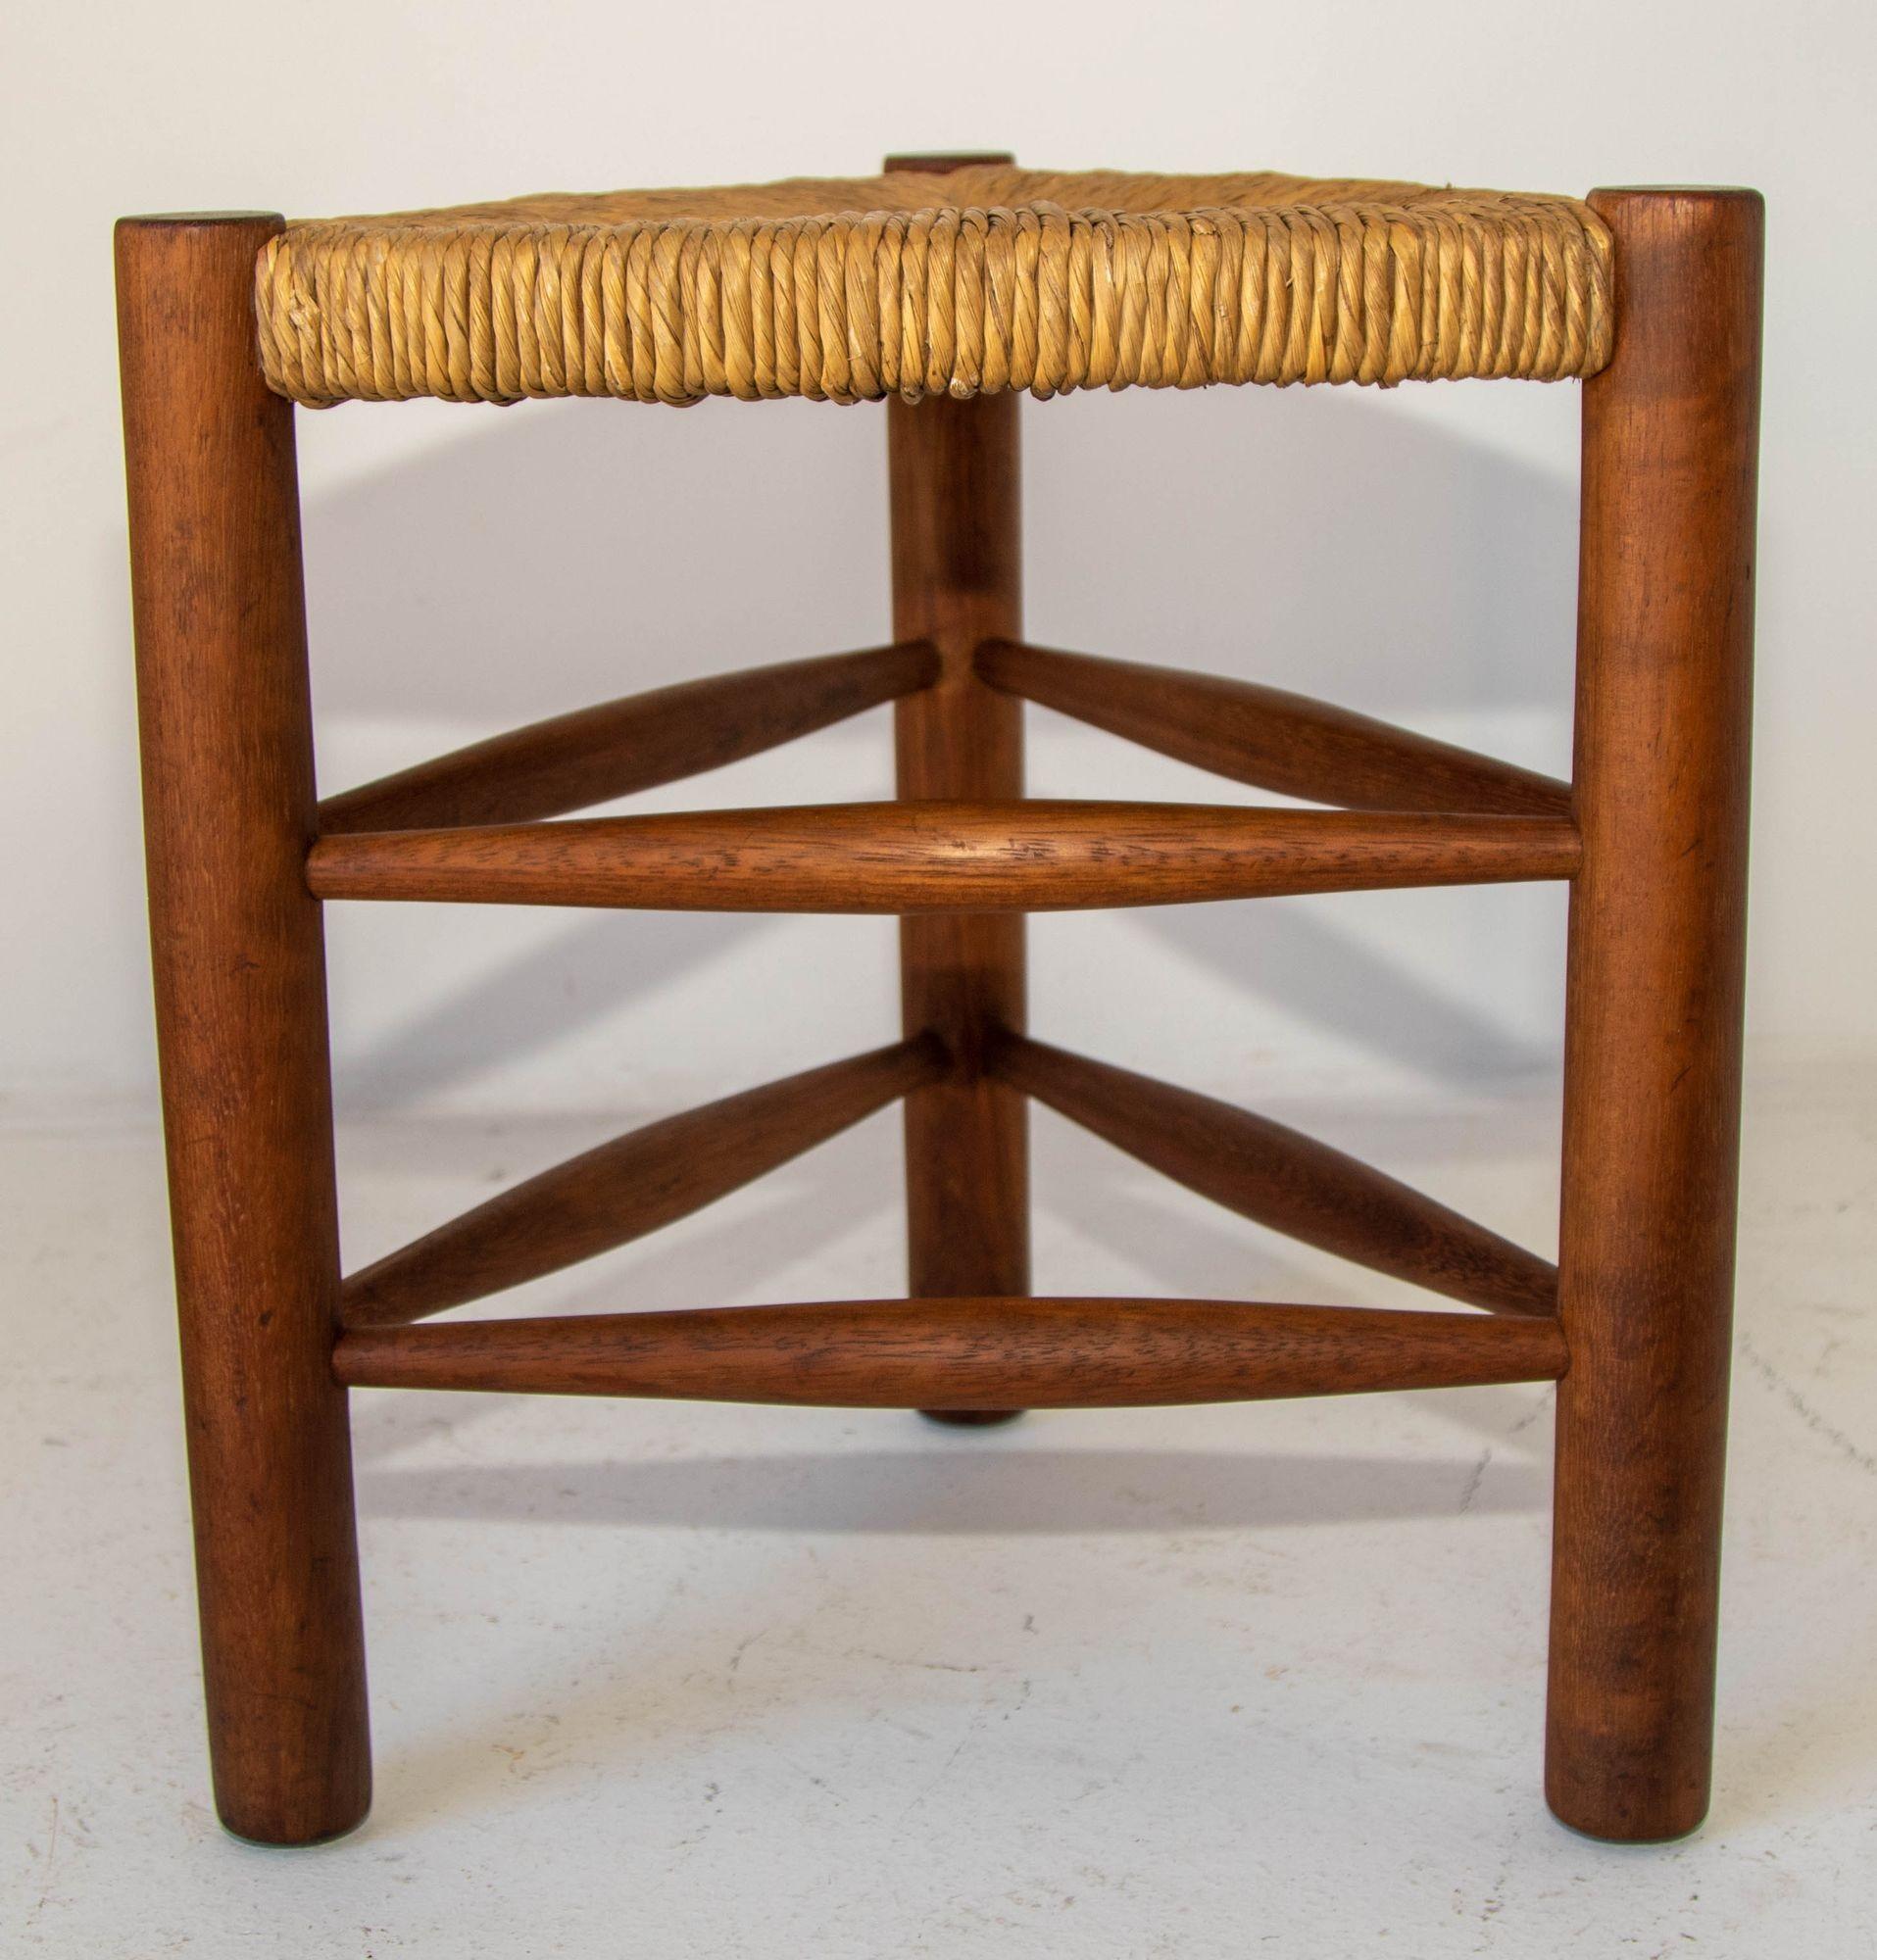 Hand-Crafted Vintage French Rush Woven Tripod Wooden Stool 1950 Charlotte Perriand Style For Sale